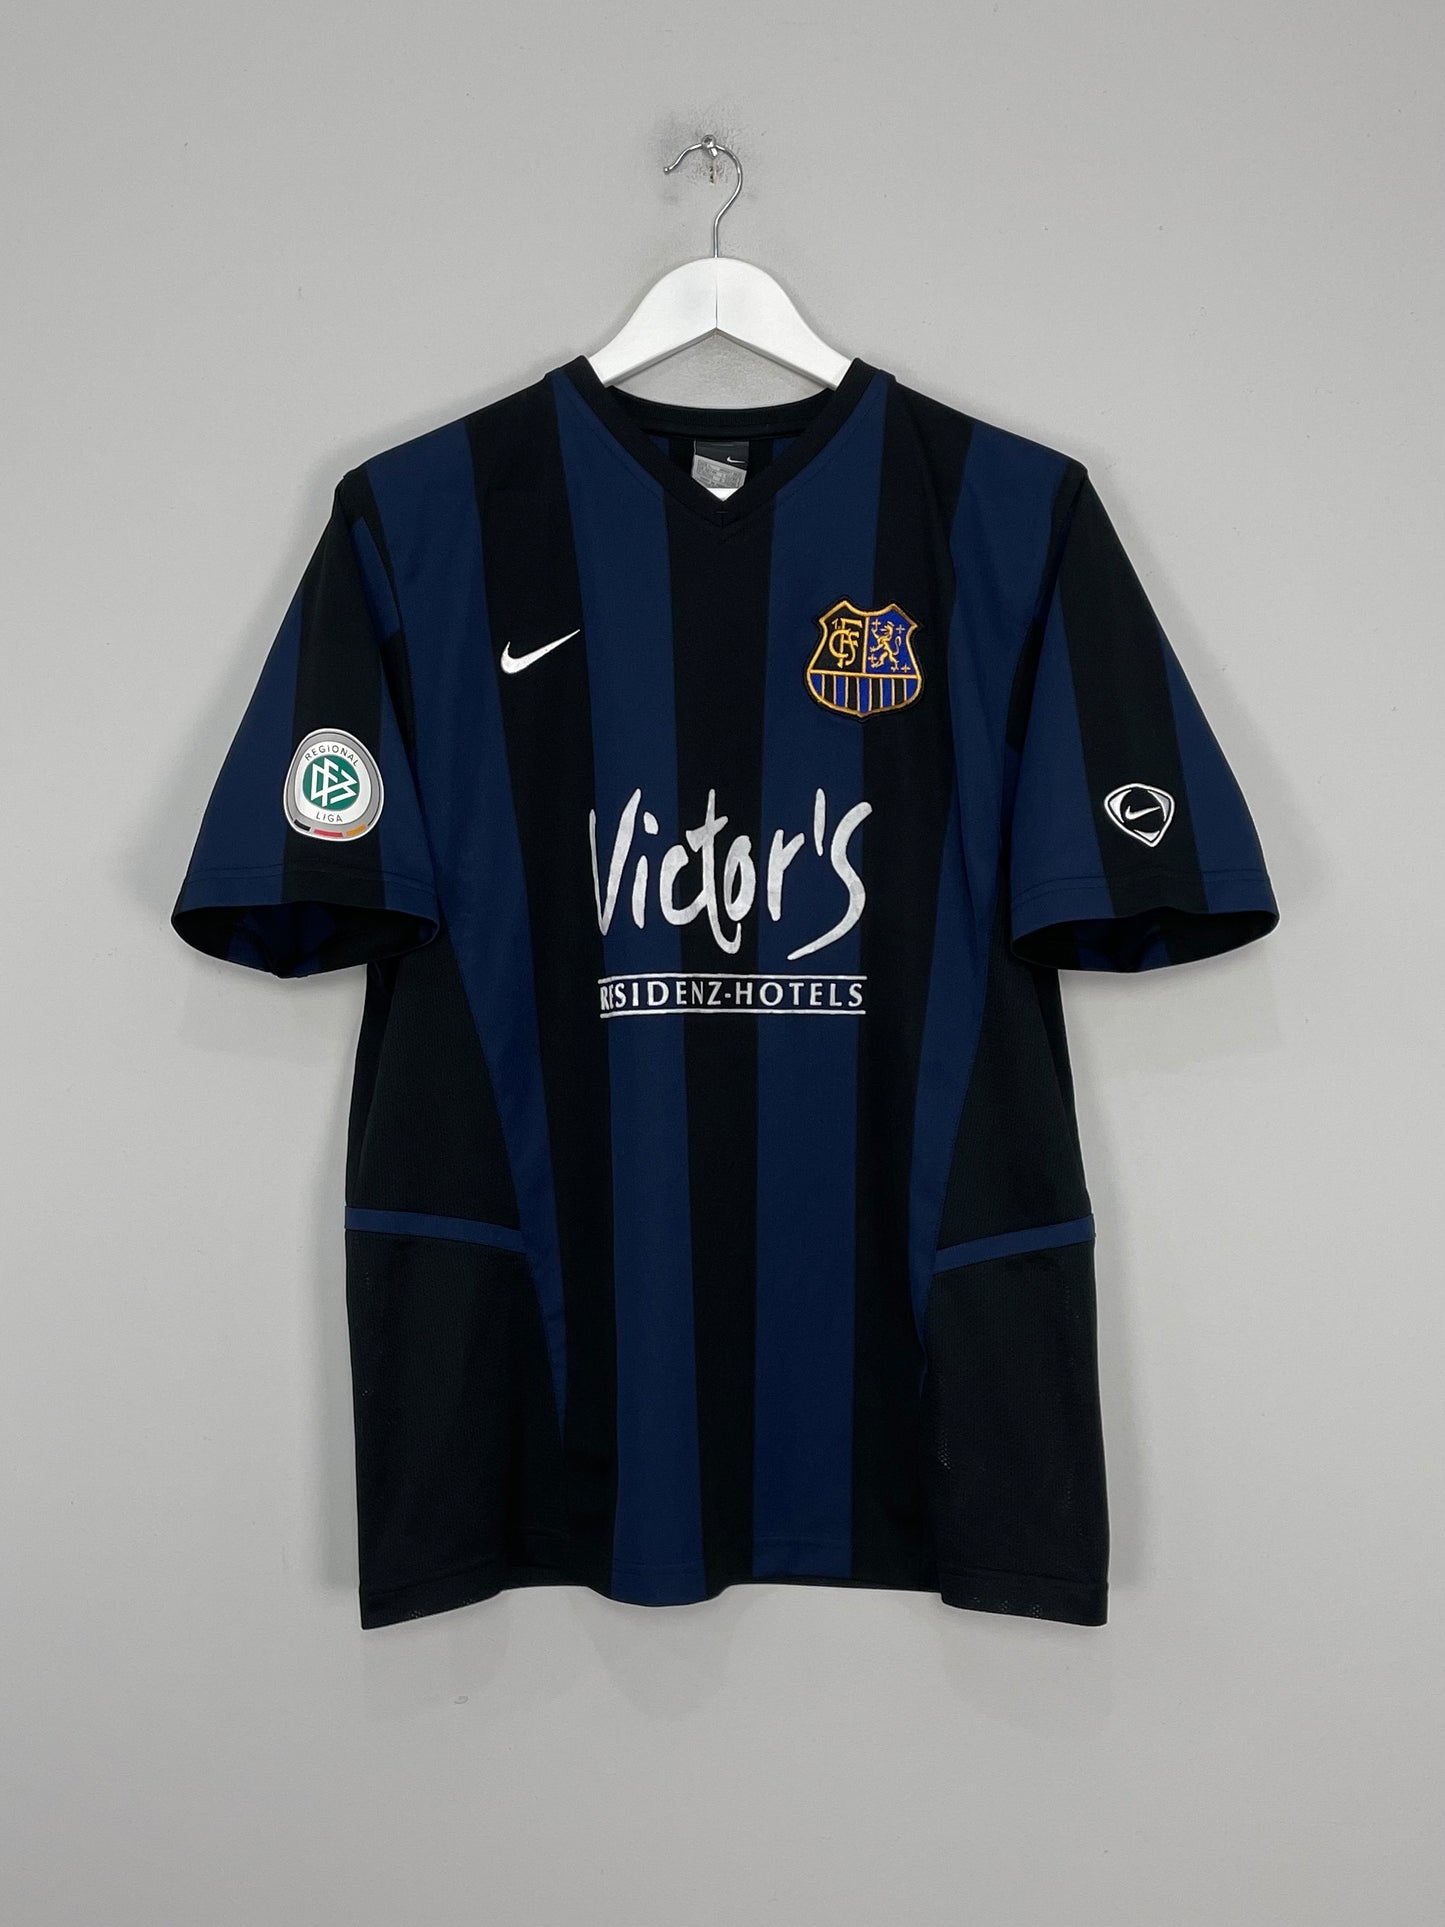 Image of the Saarsbrucken shirt from the 2004/05 season